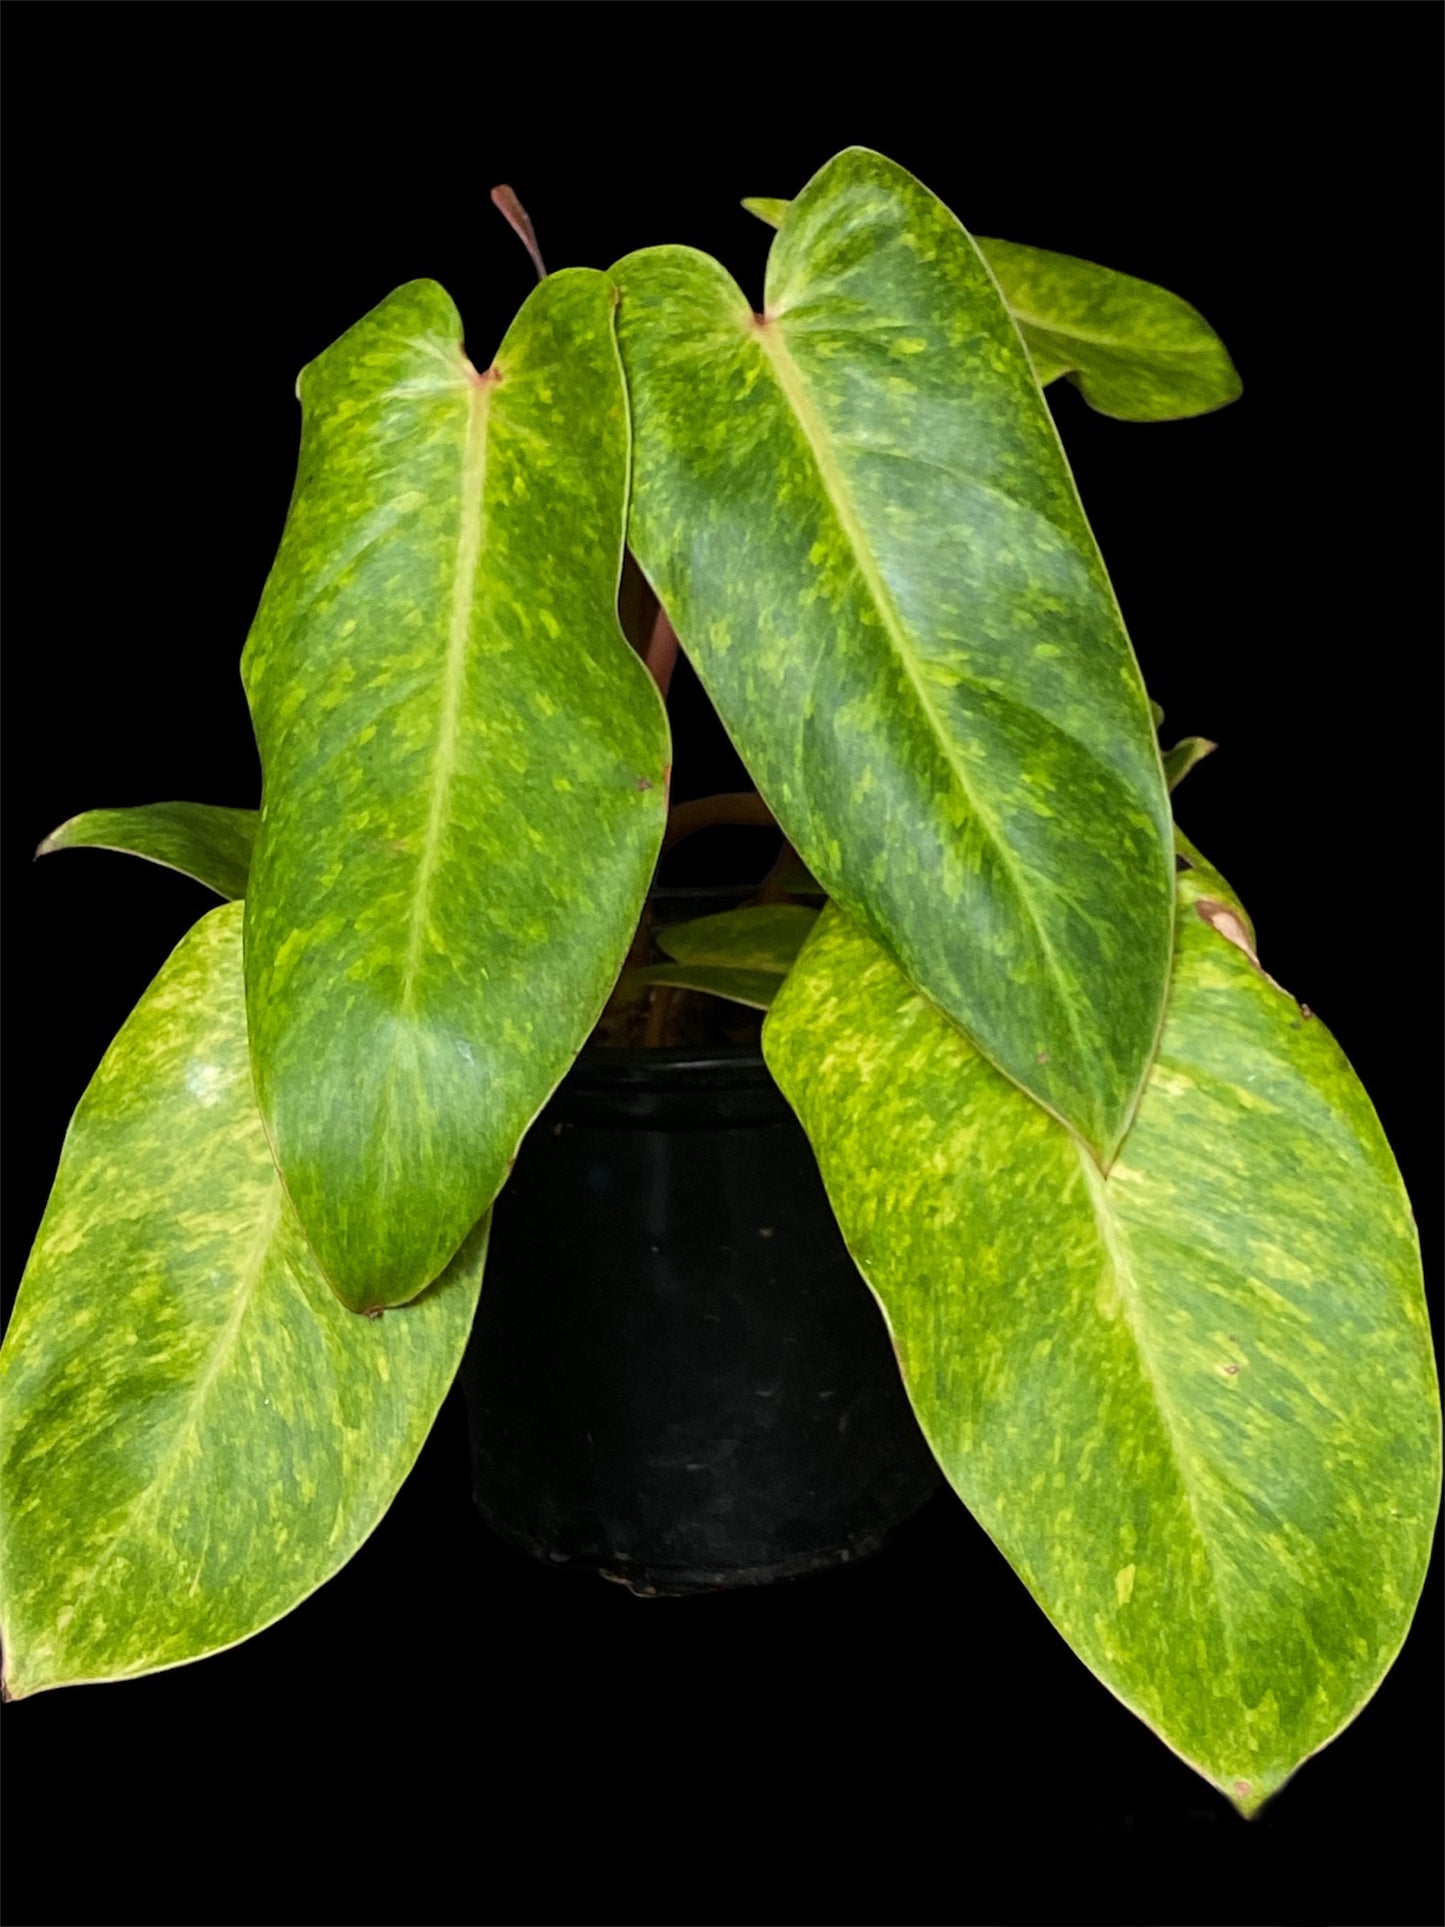 Philodendron painted lady